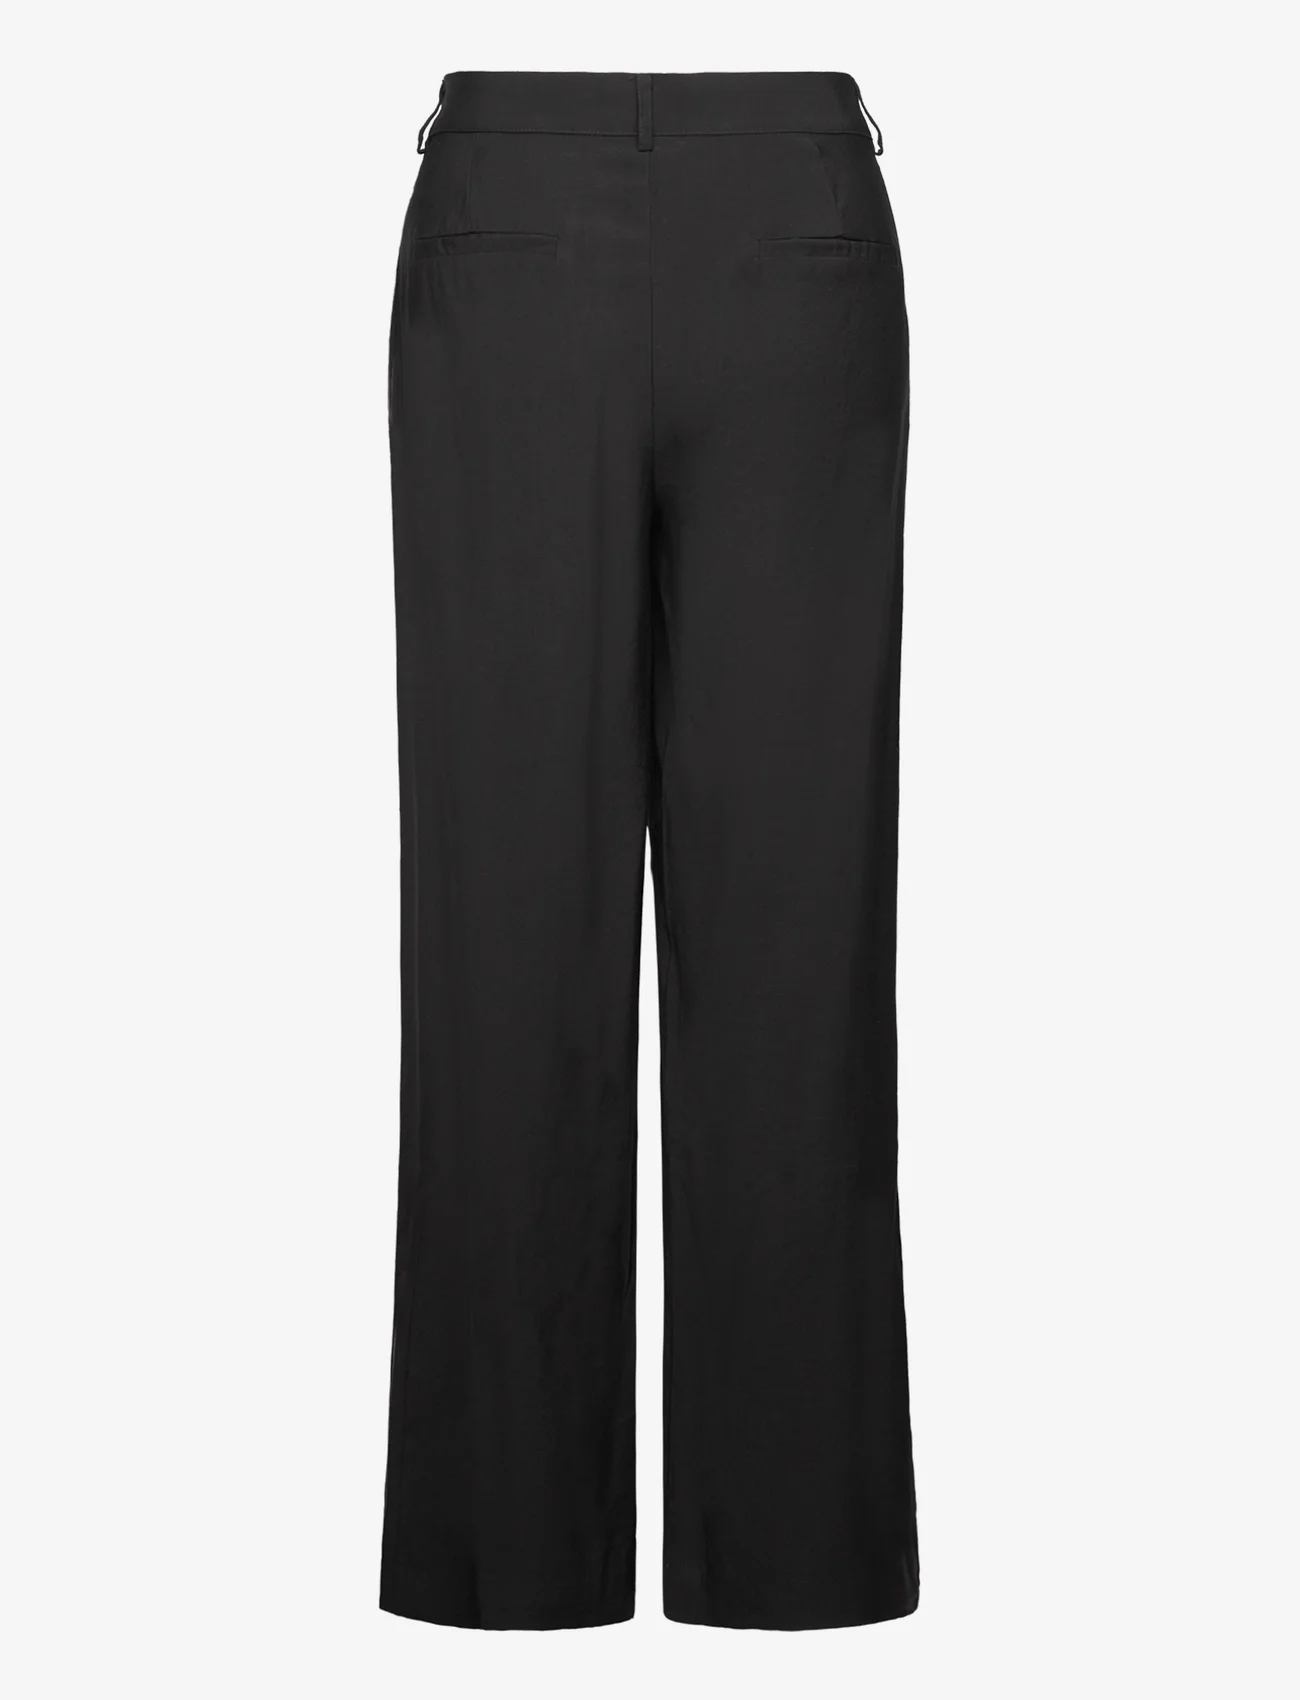 Lollys Laundry - Leo Pants - tailored trousers - black - 1